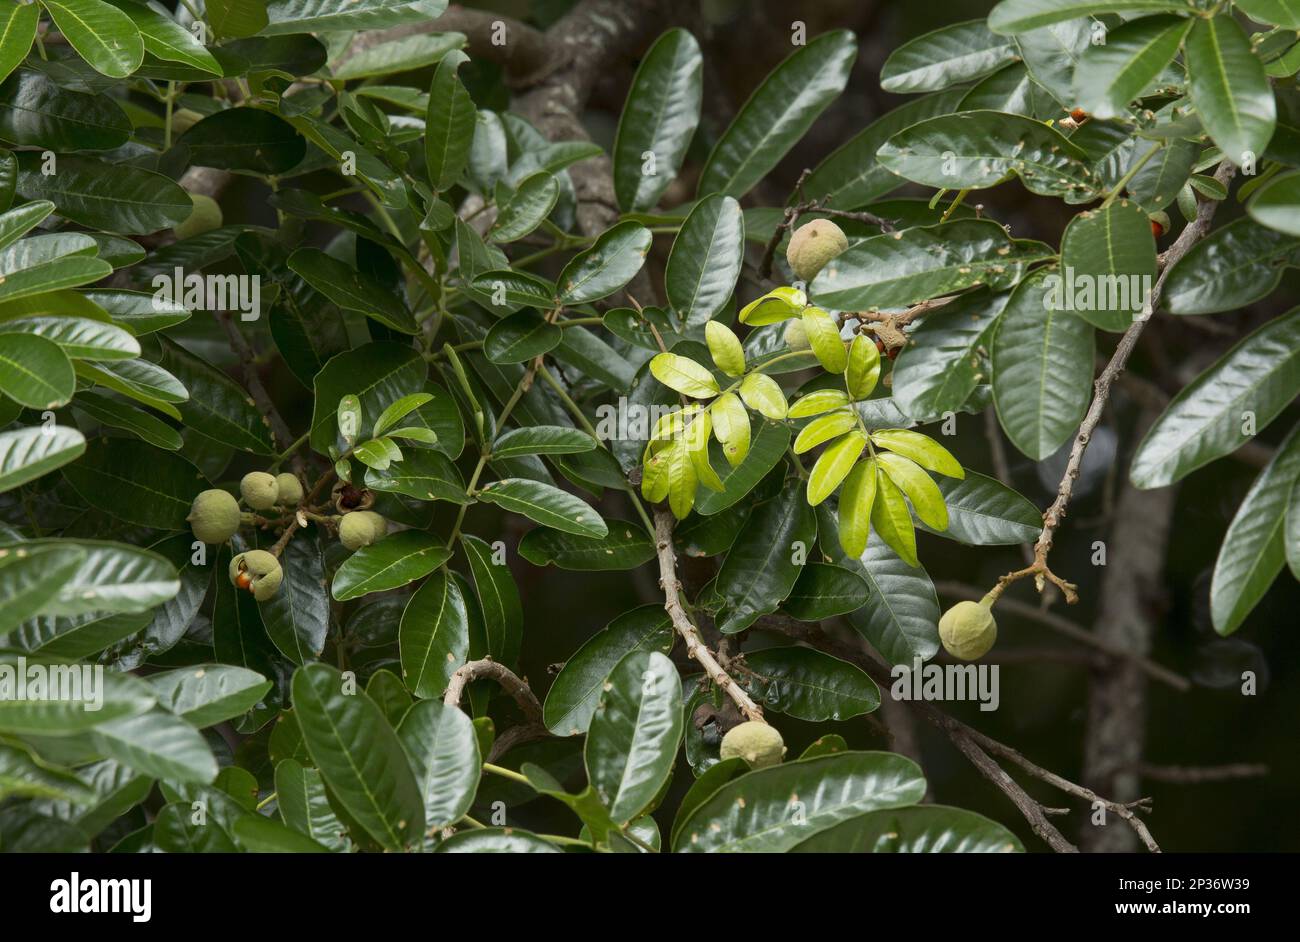 Forest Mahogany (Trichilia dregeana) close-up of leaves and fruit, Kruger N.P., Great Limpopo Transfrontier Park, South Africa Stock Photo